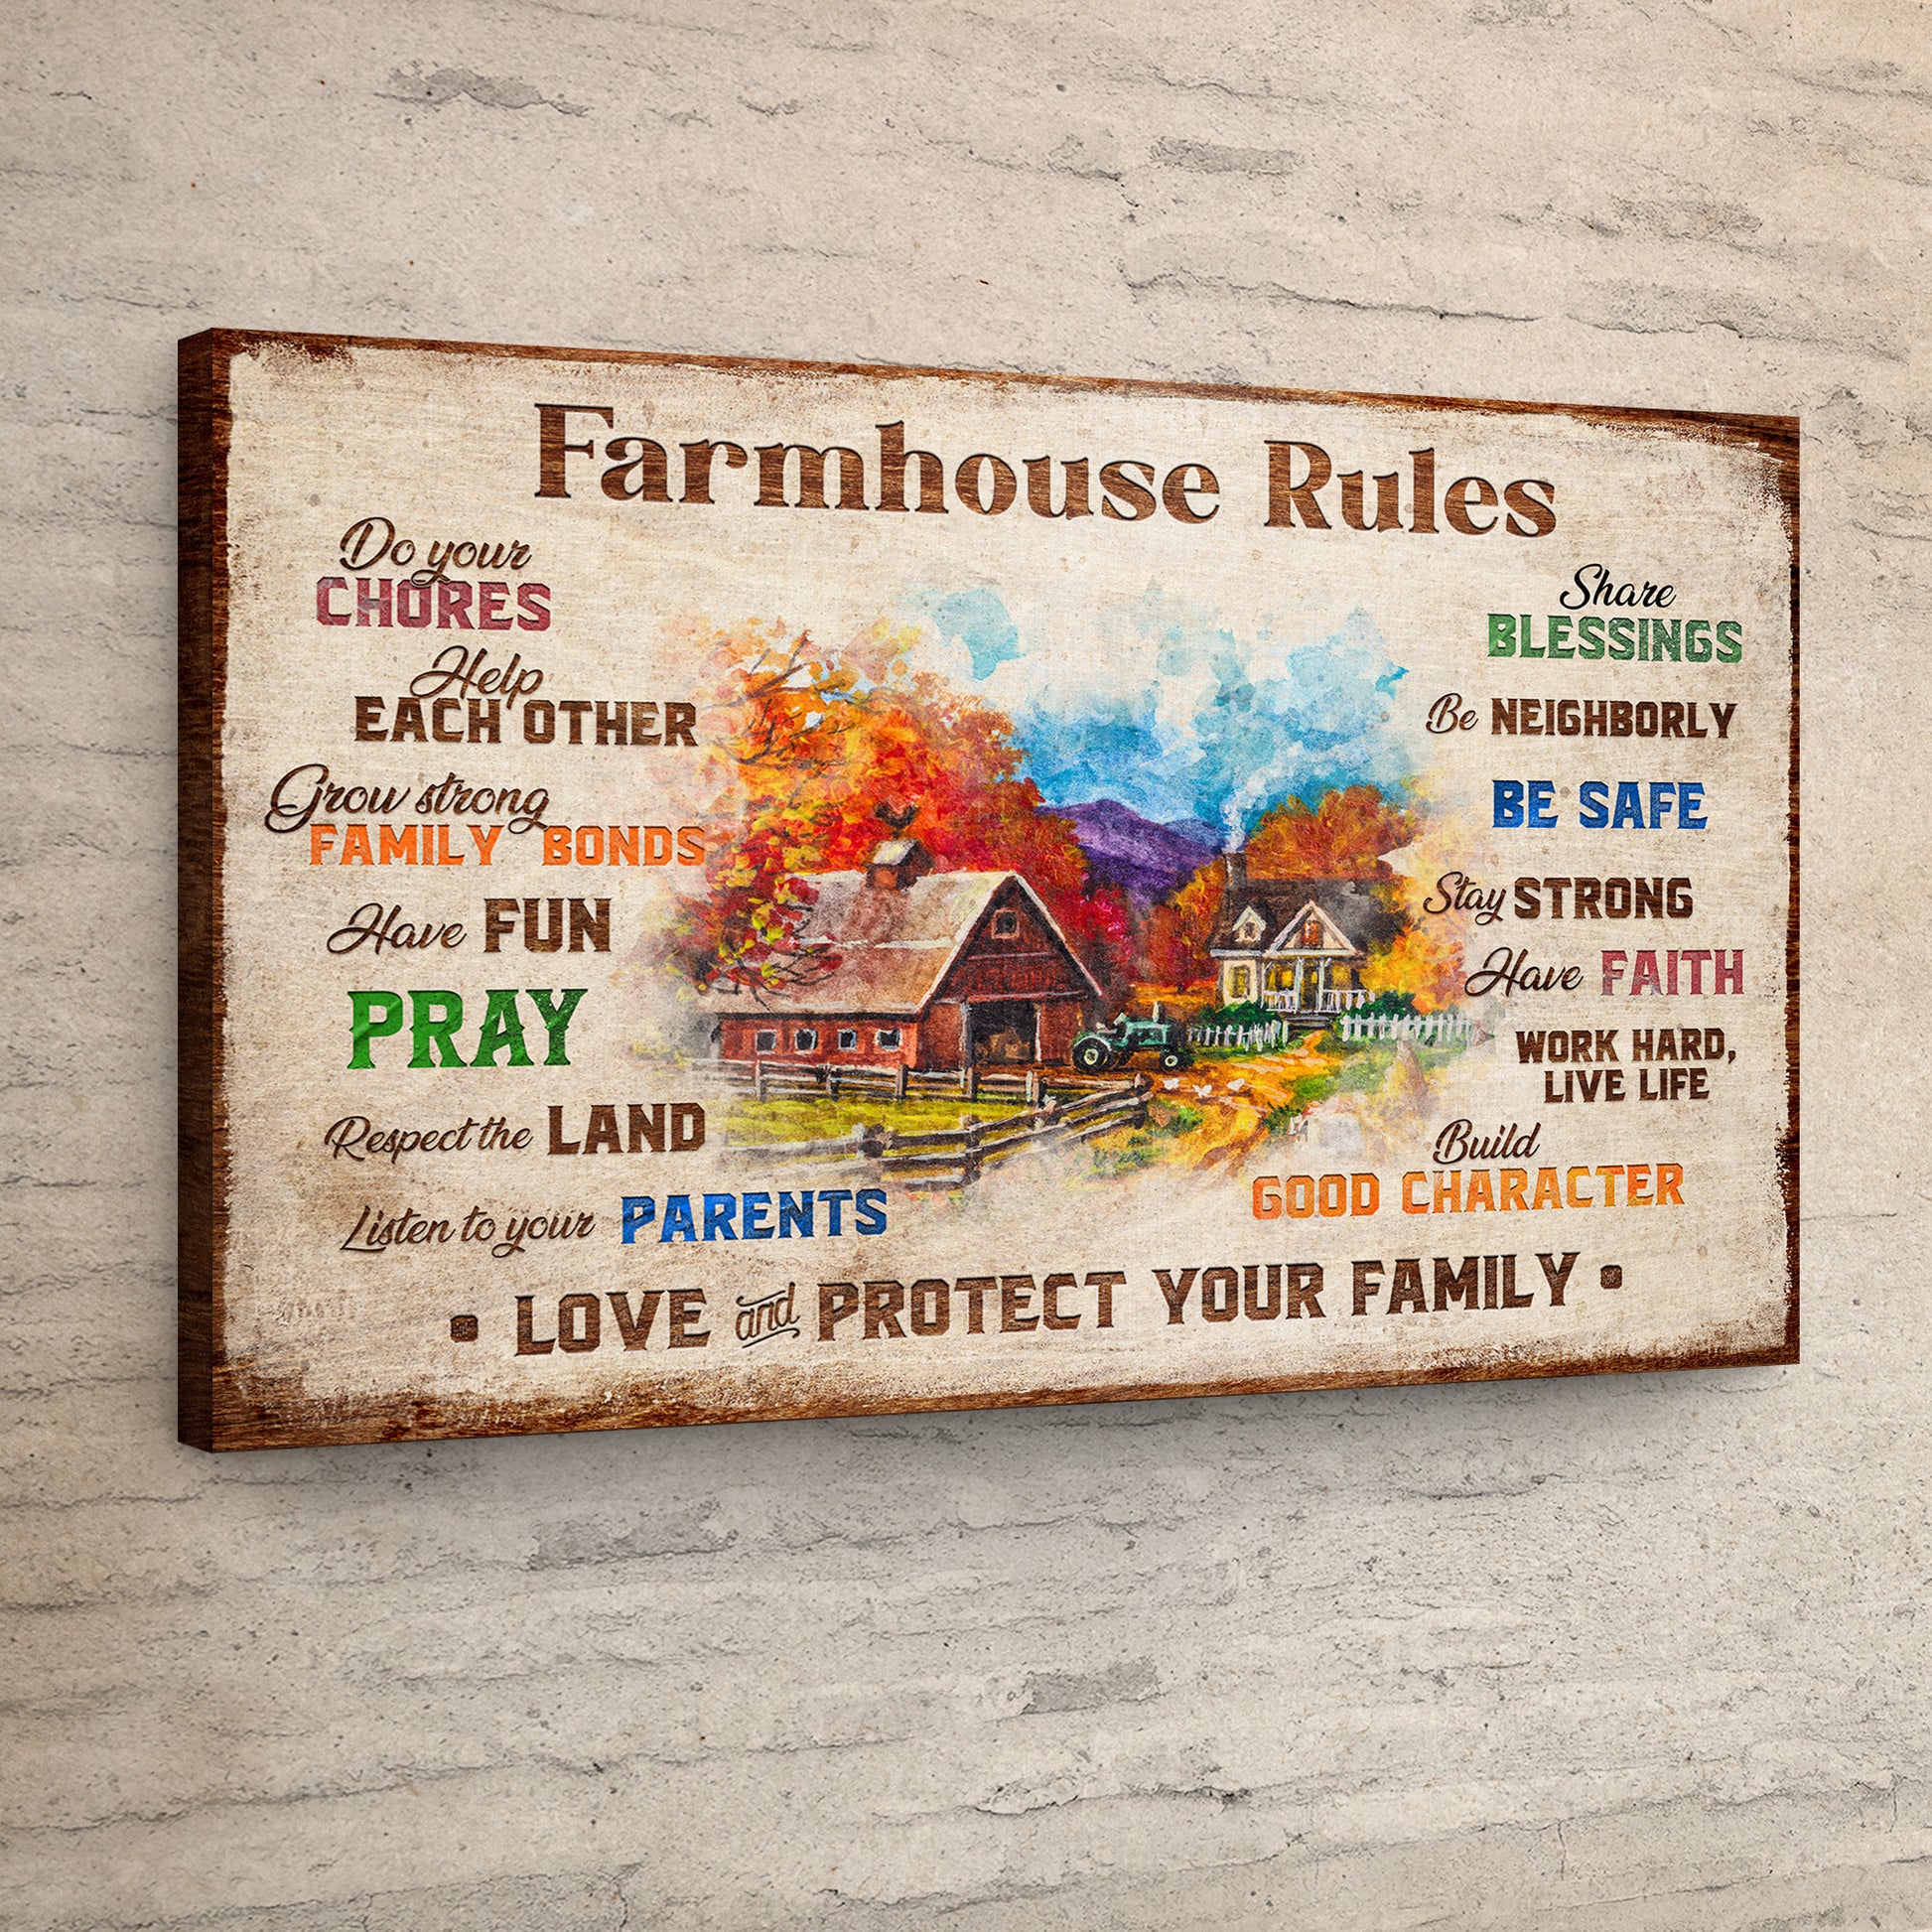 Family Farmhouse Rules Sign Style 1 - Image by Tailored Canvases